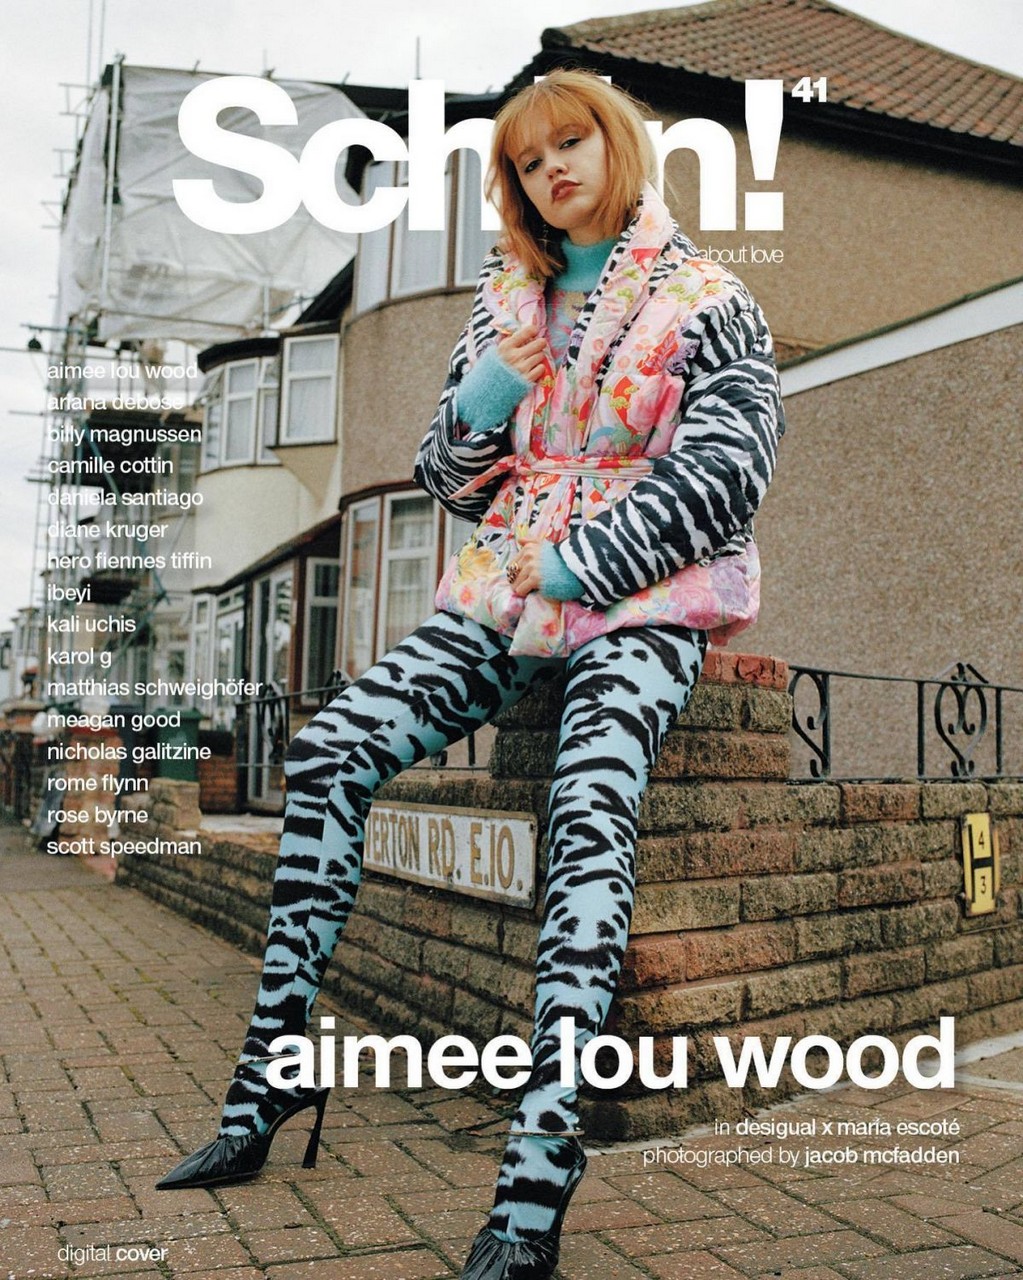 Aimee Lou Wood For Schon Agazine October